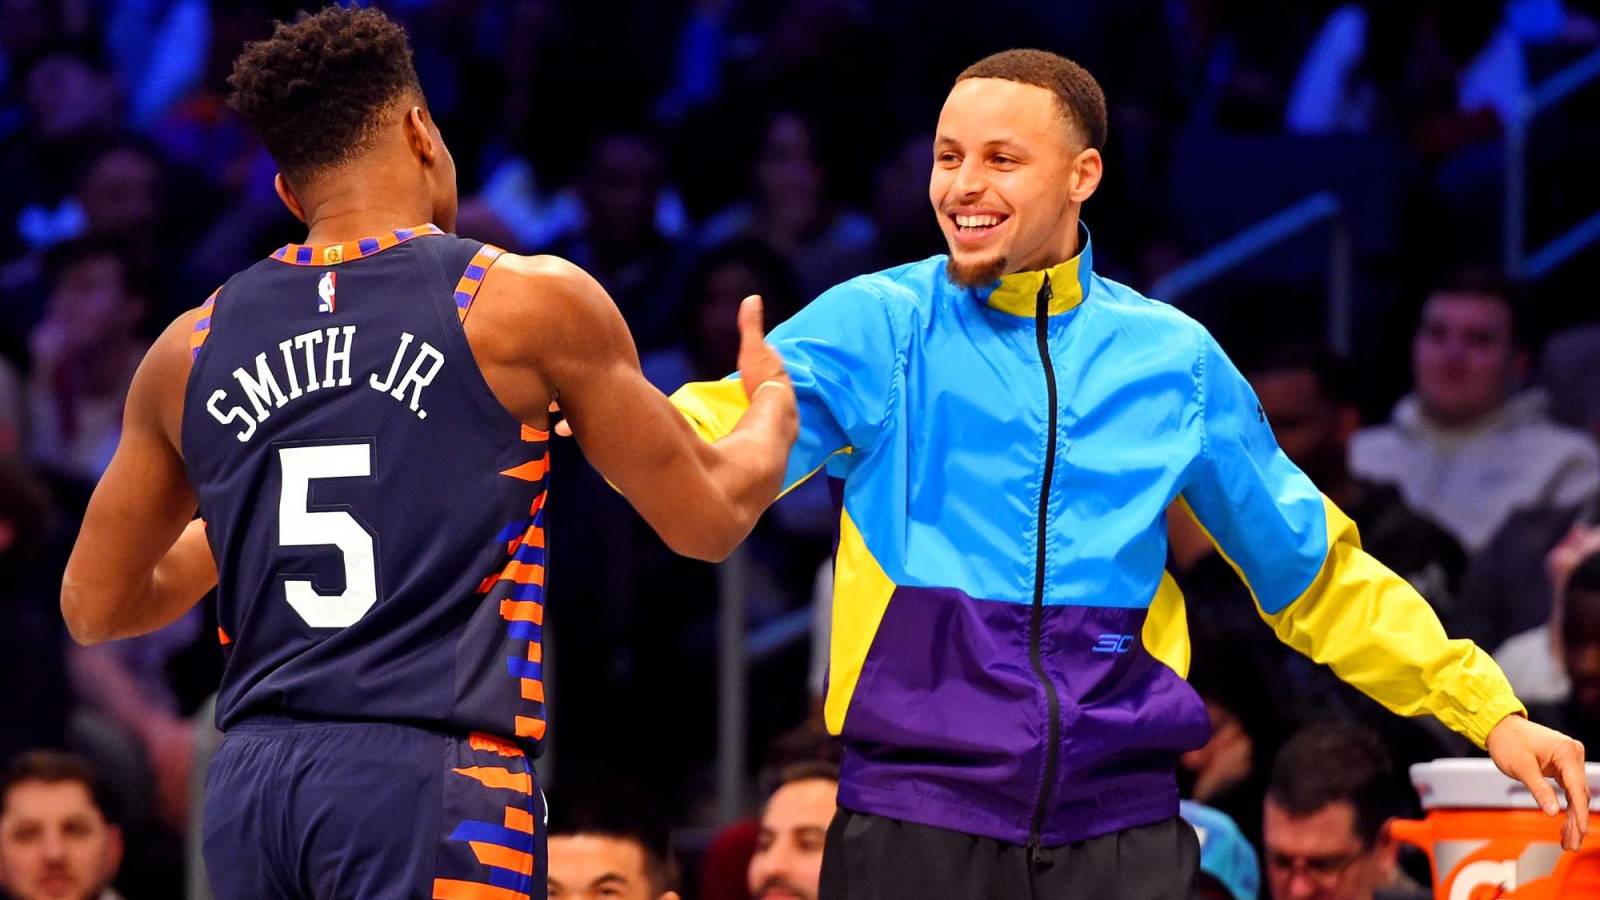 Steph Curry wore awesome throwback 